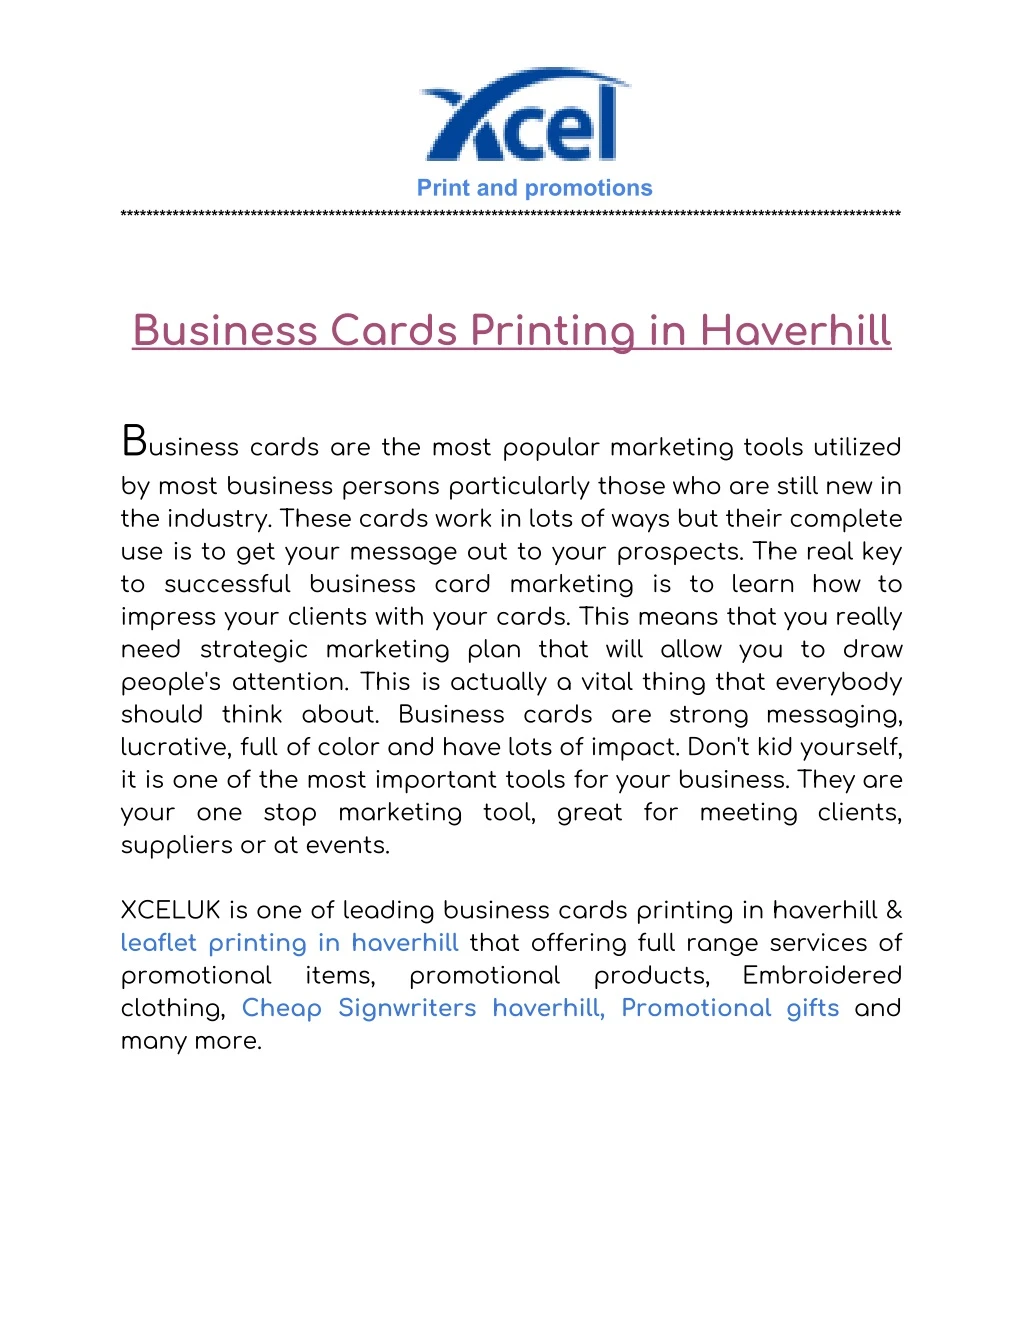 print and promotions business cards printing